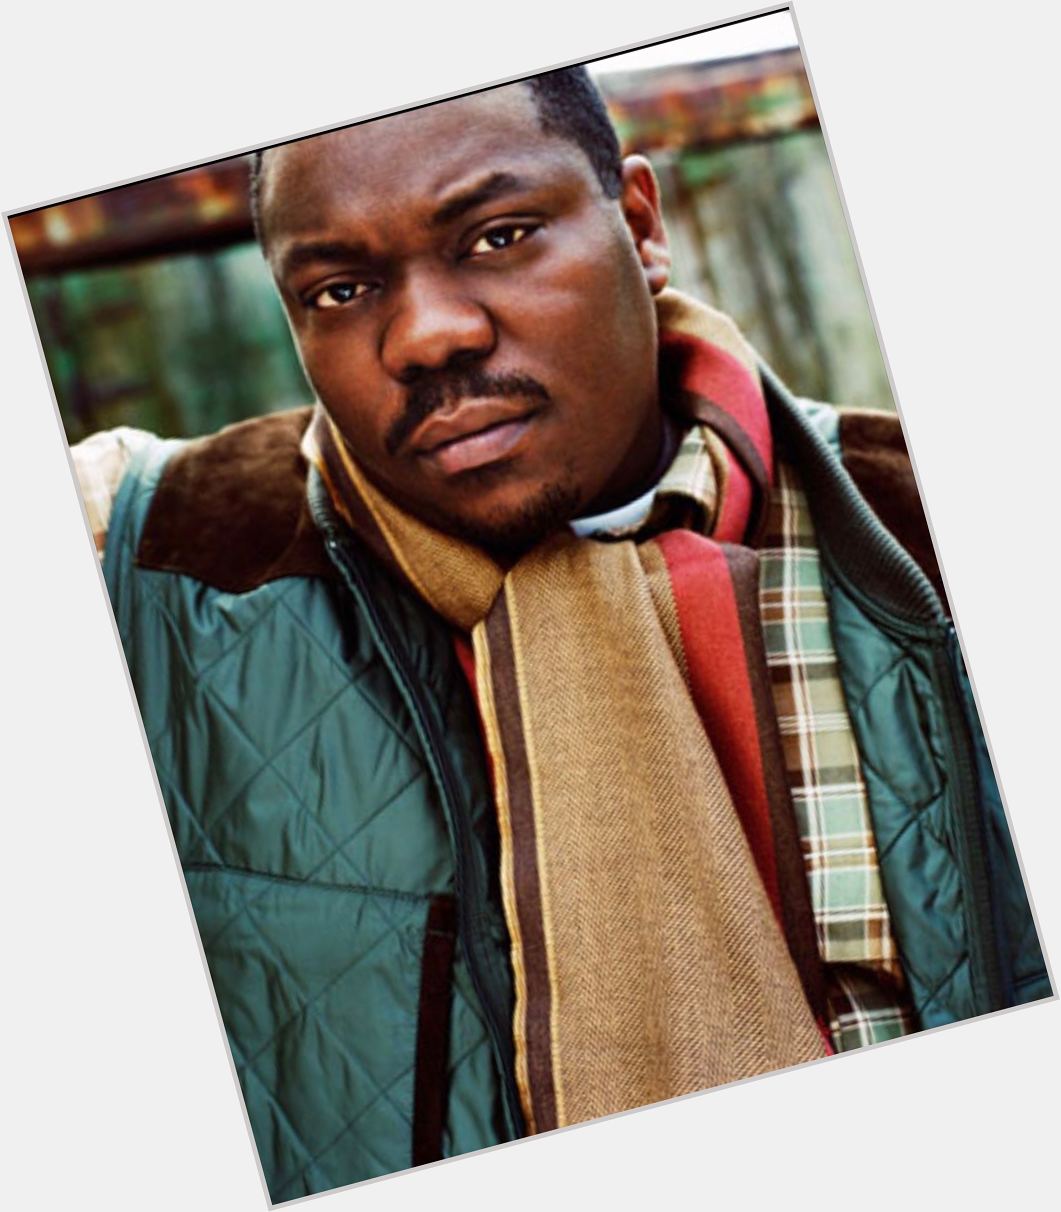 Happy Birthday to the Broad St Bully Beanie Sigel 